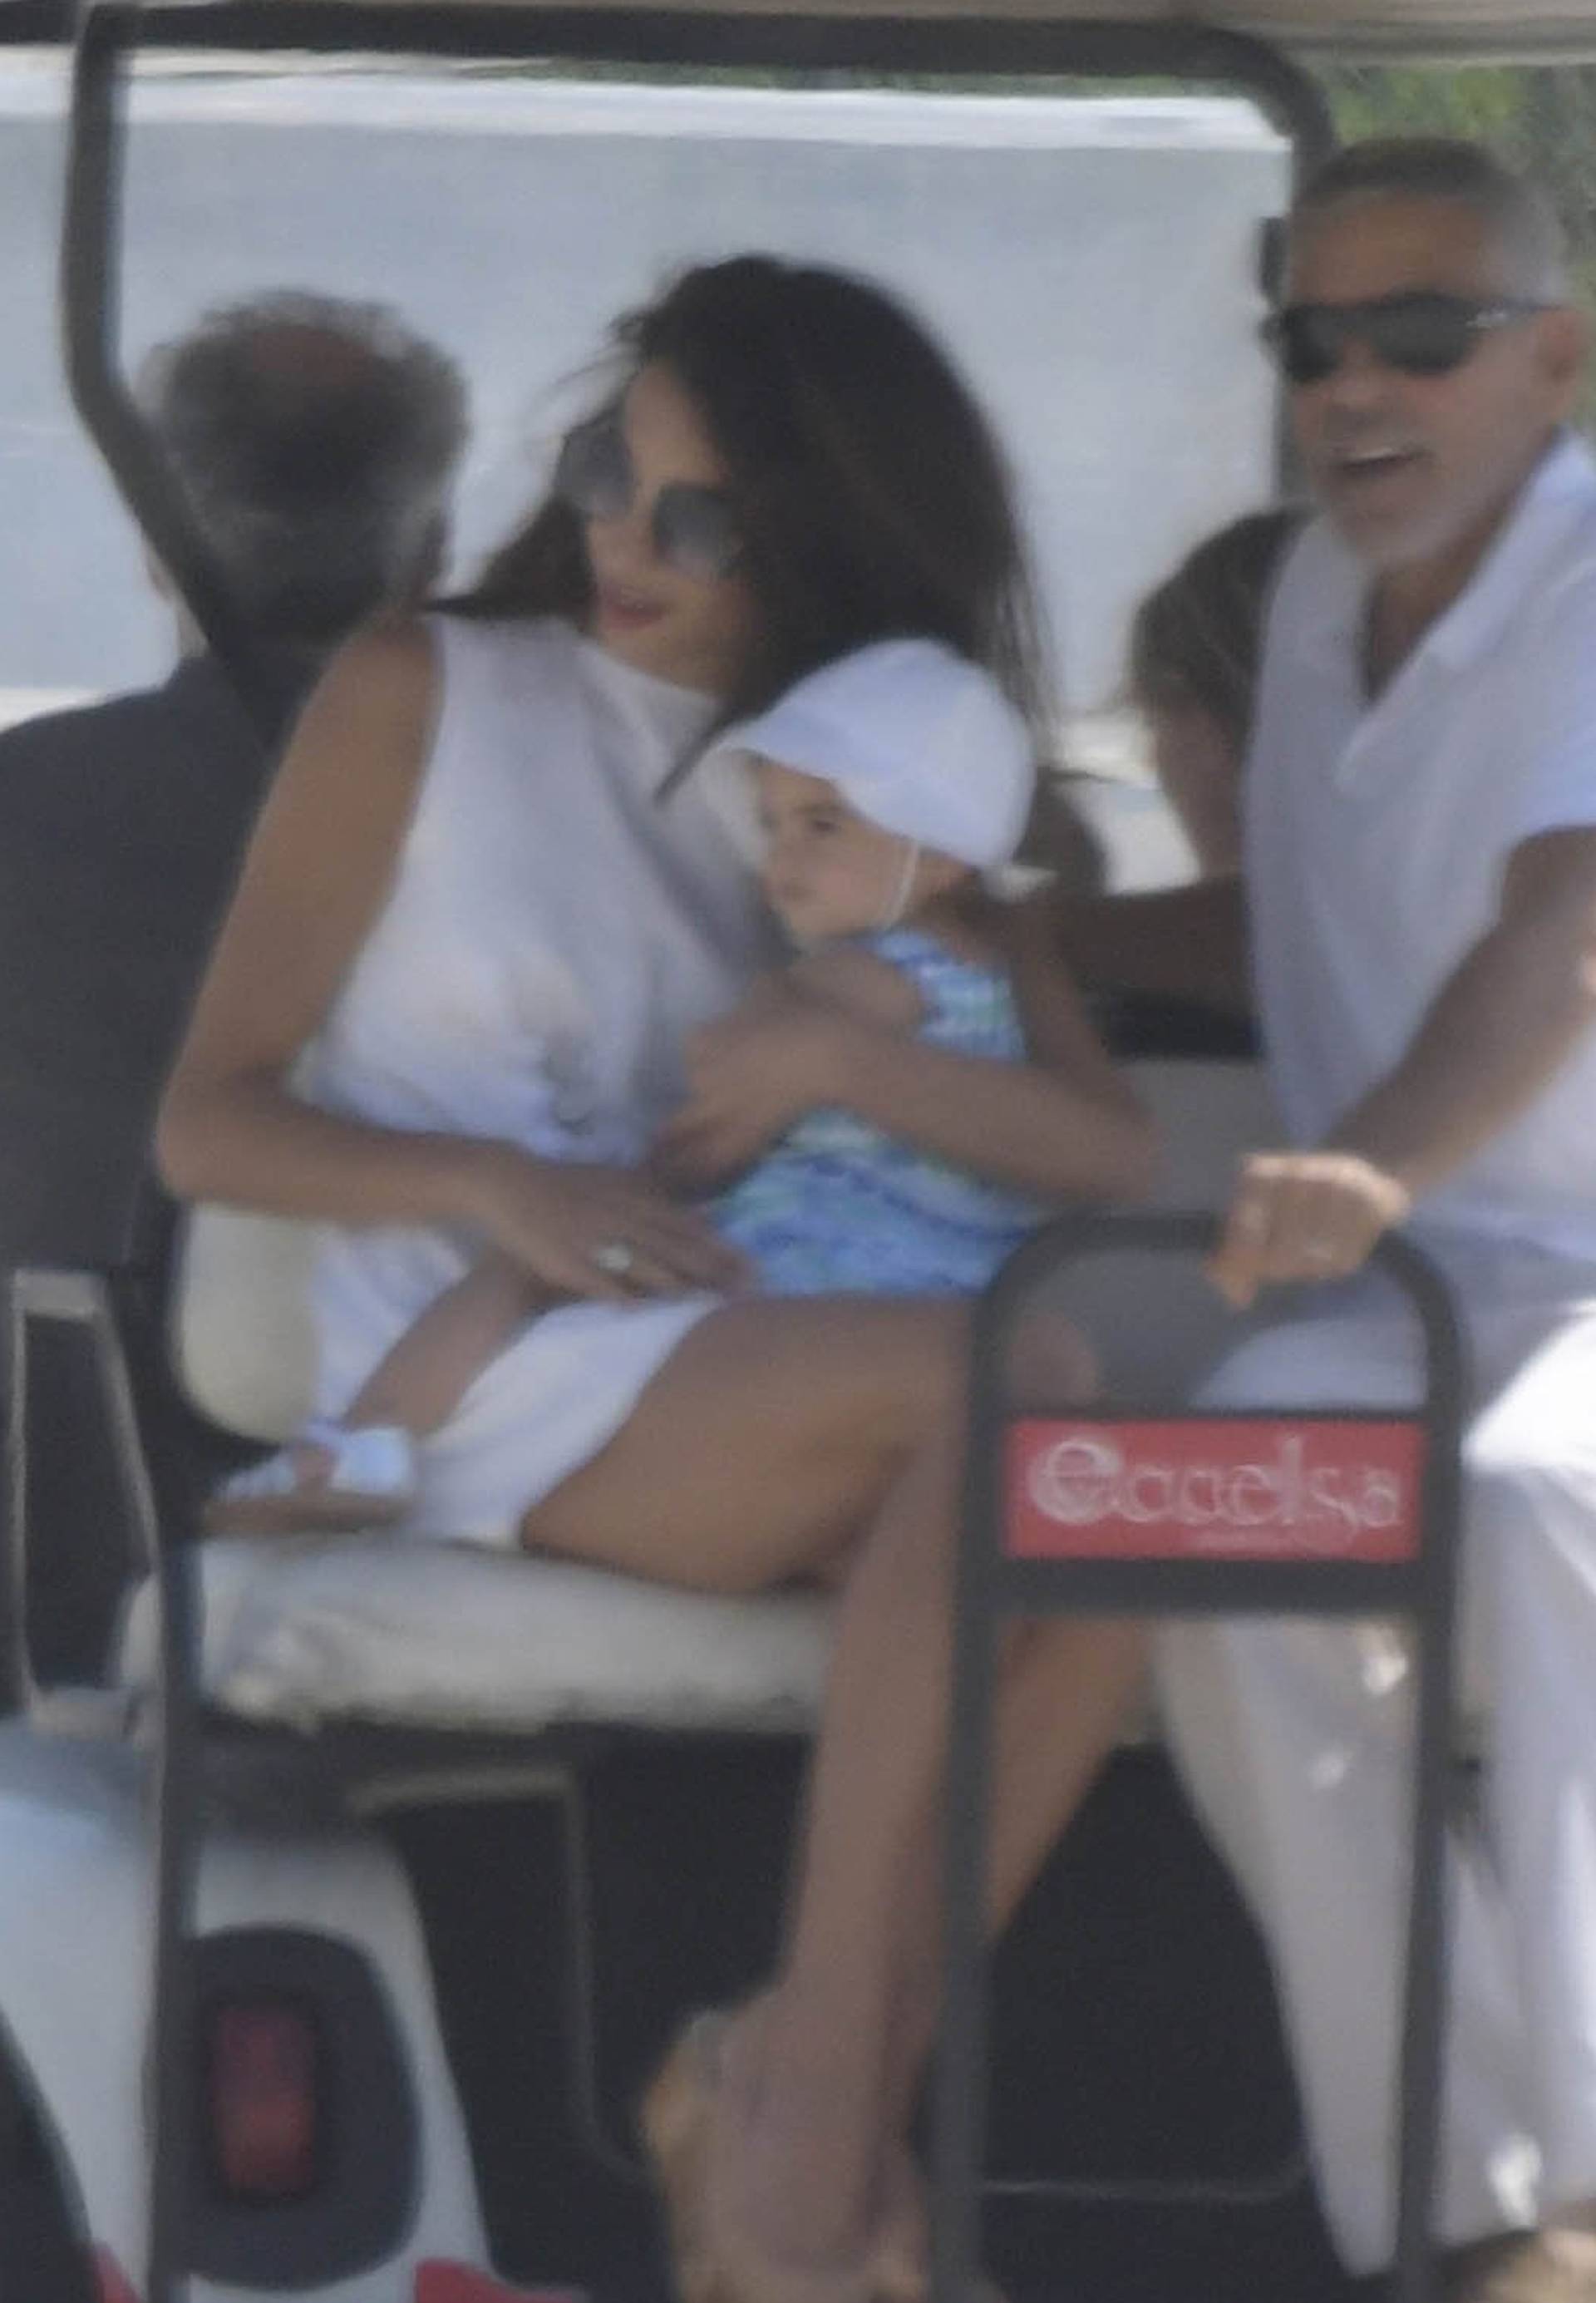 George Clooney departing from Olbia with wife Amal and the twins